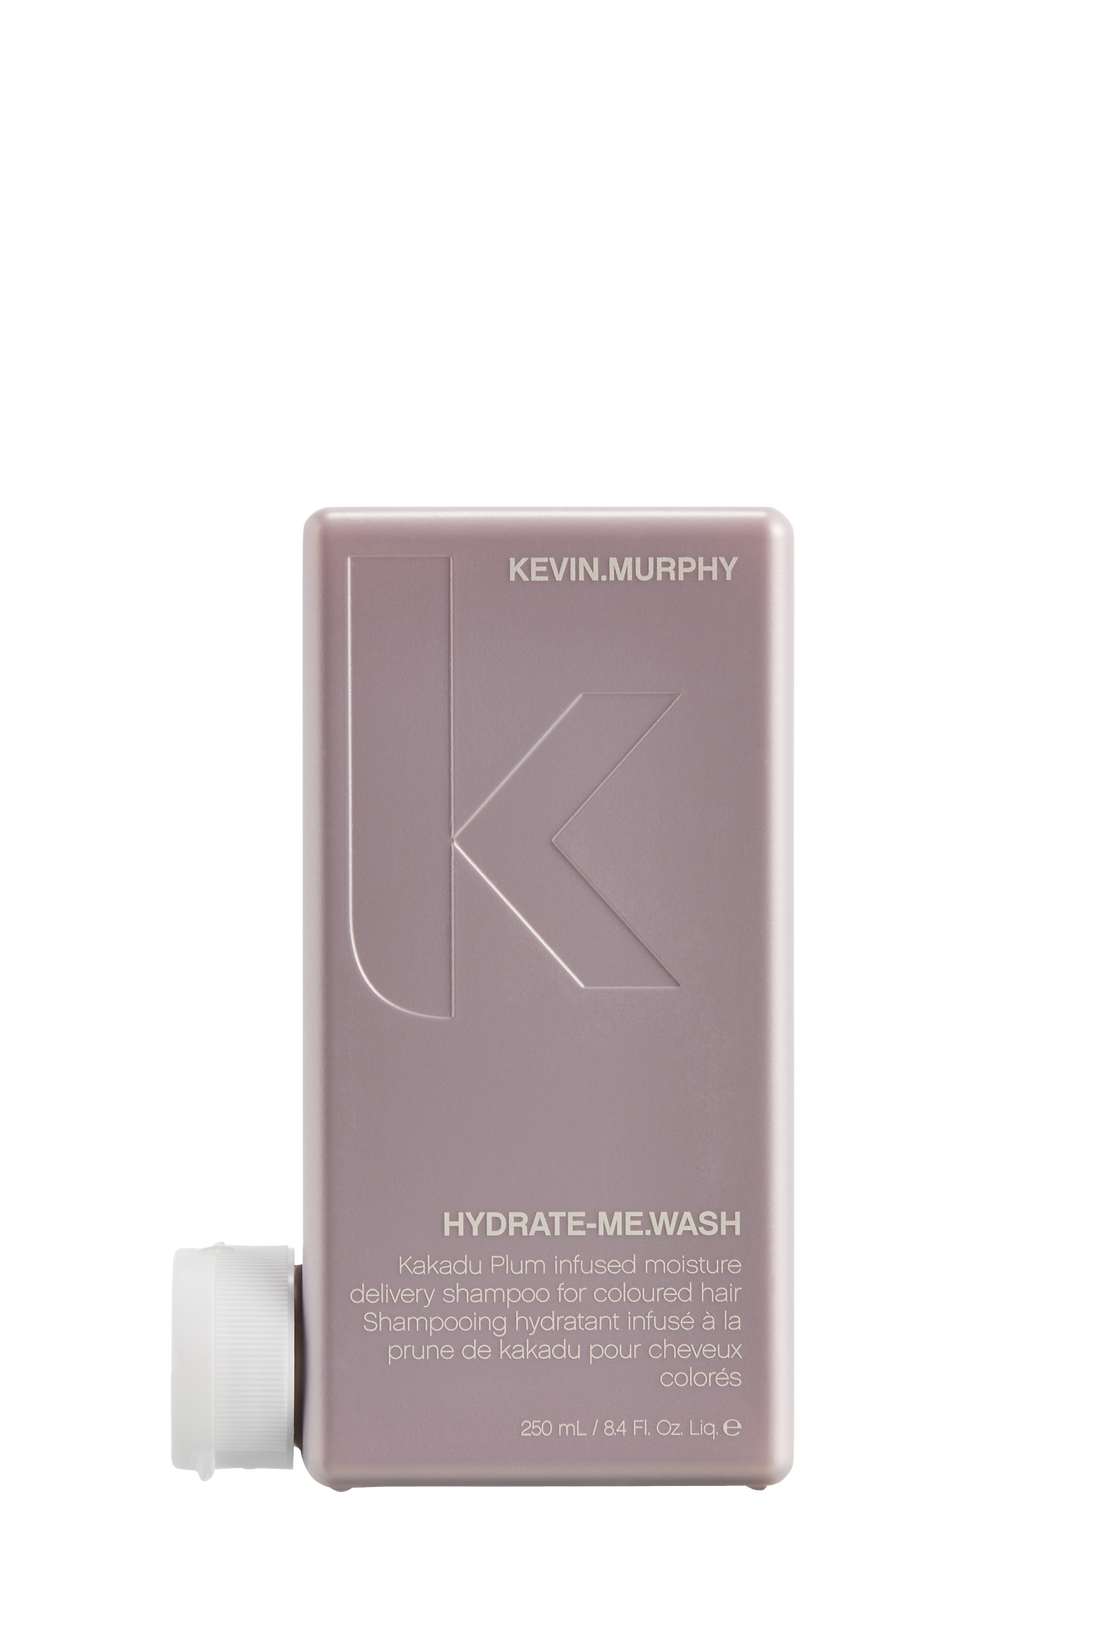 KEVIN MURPHY HYDRATE-ME WASH 250ml